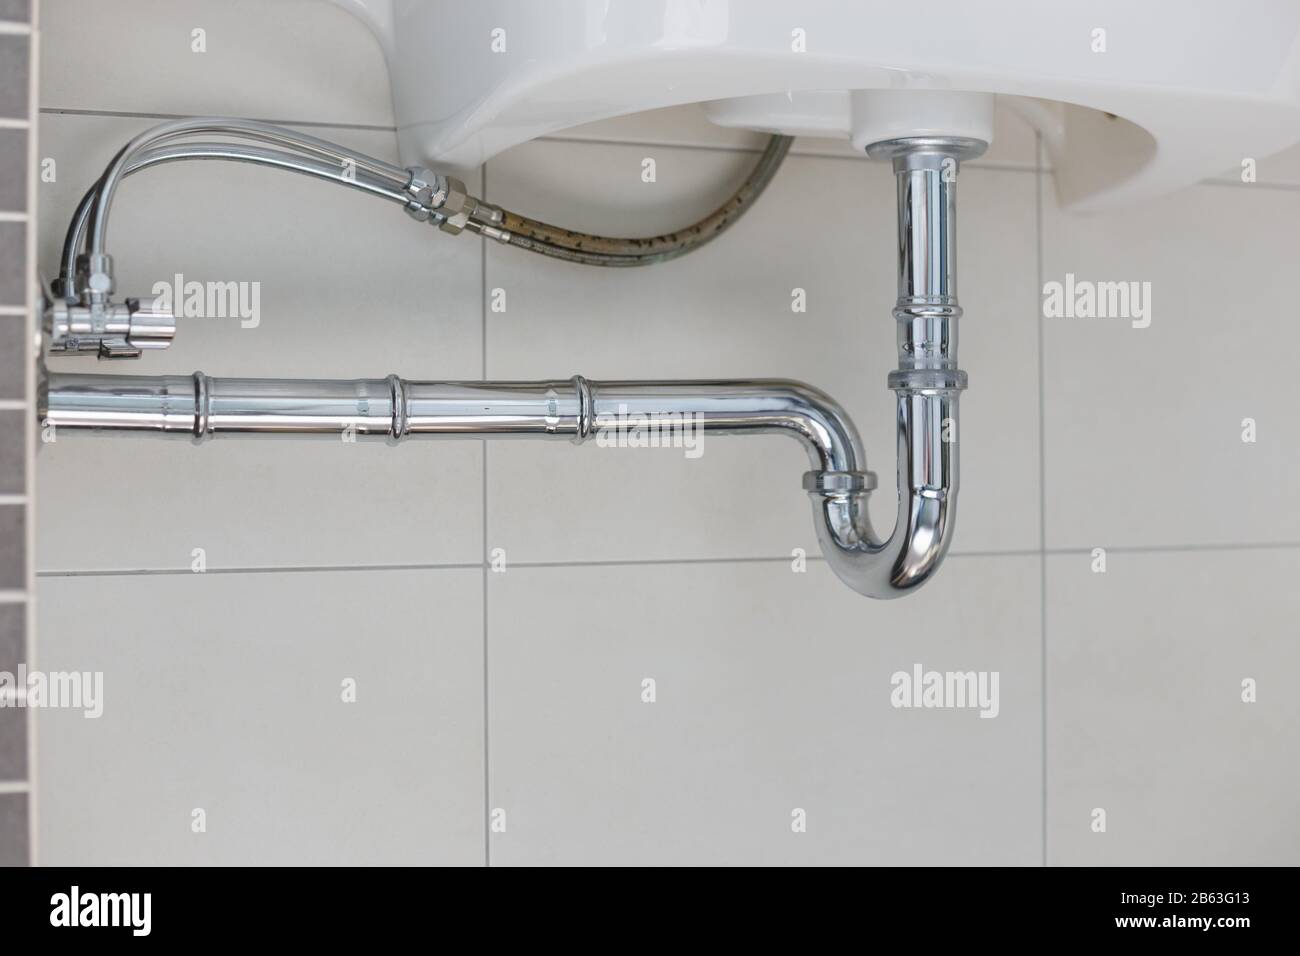 metal sink siphon and drain in white bathroom Stock Photo